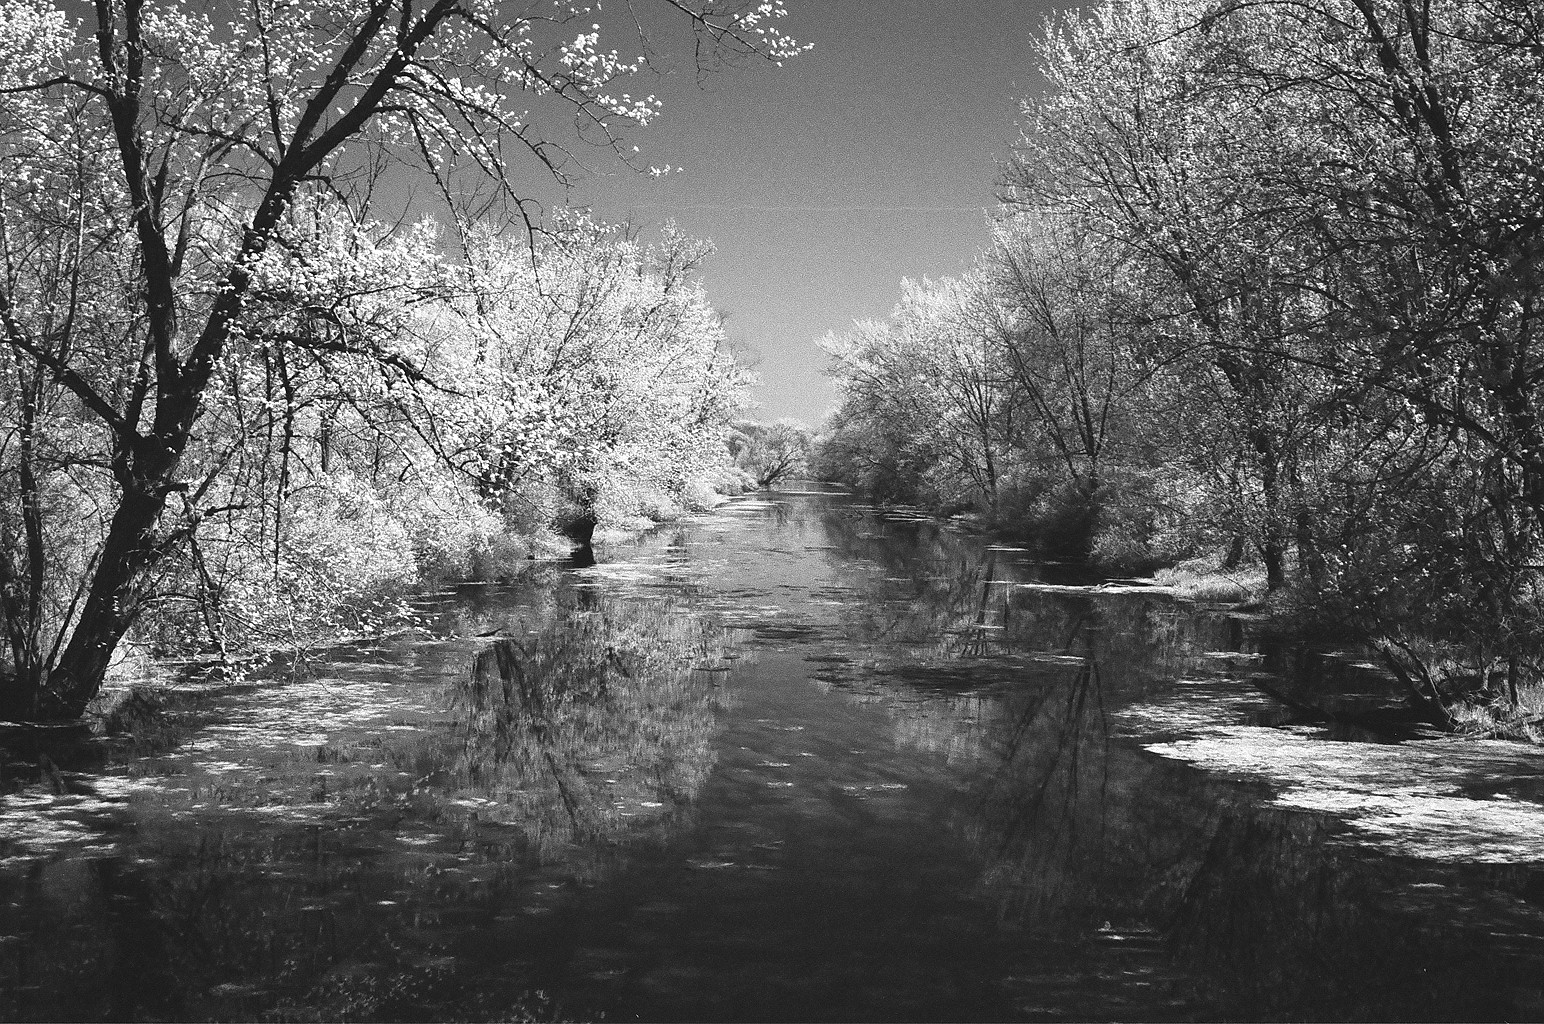 Infrared Film | Central Wisconsin film photographer